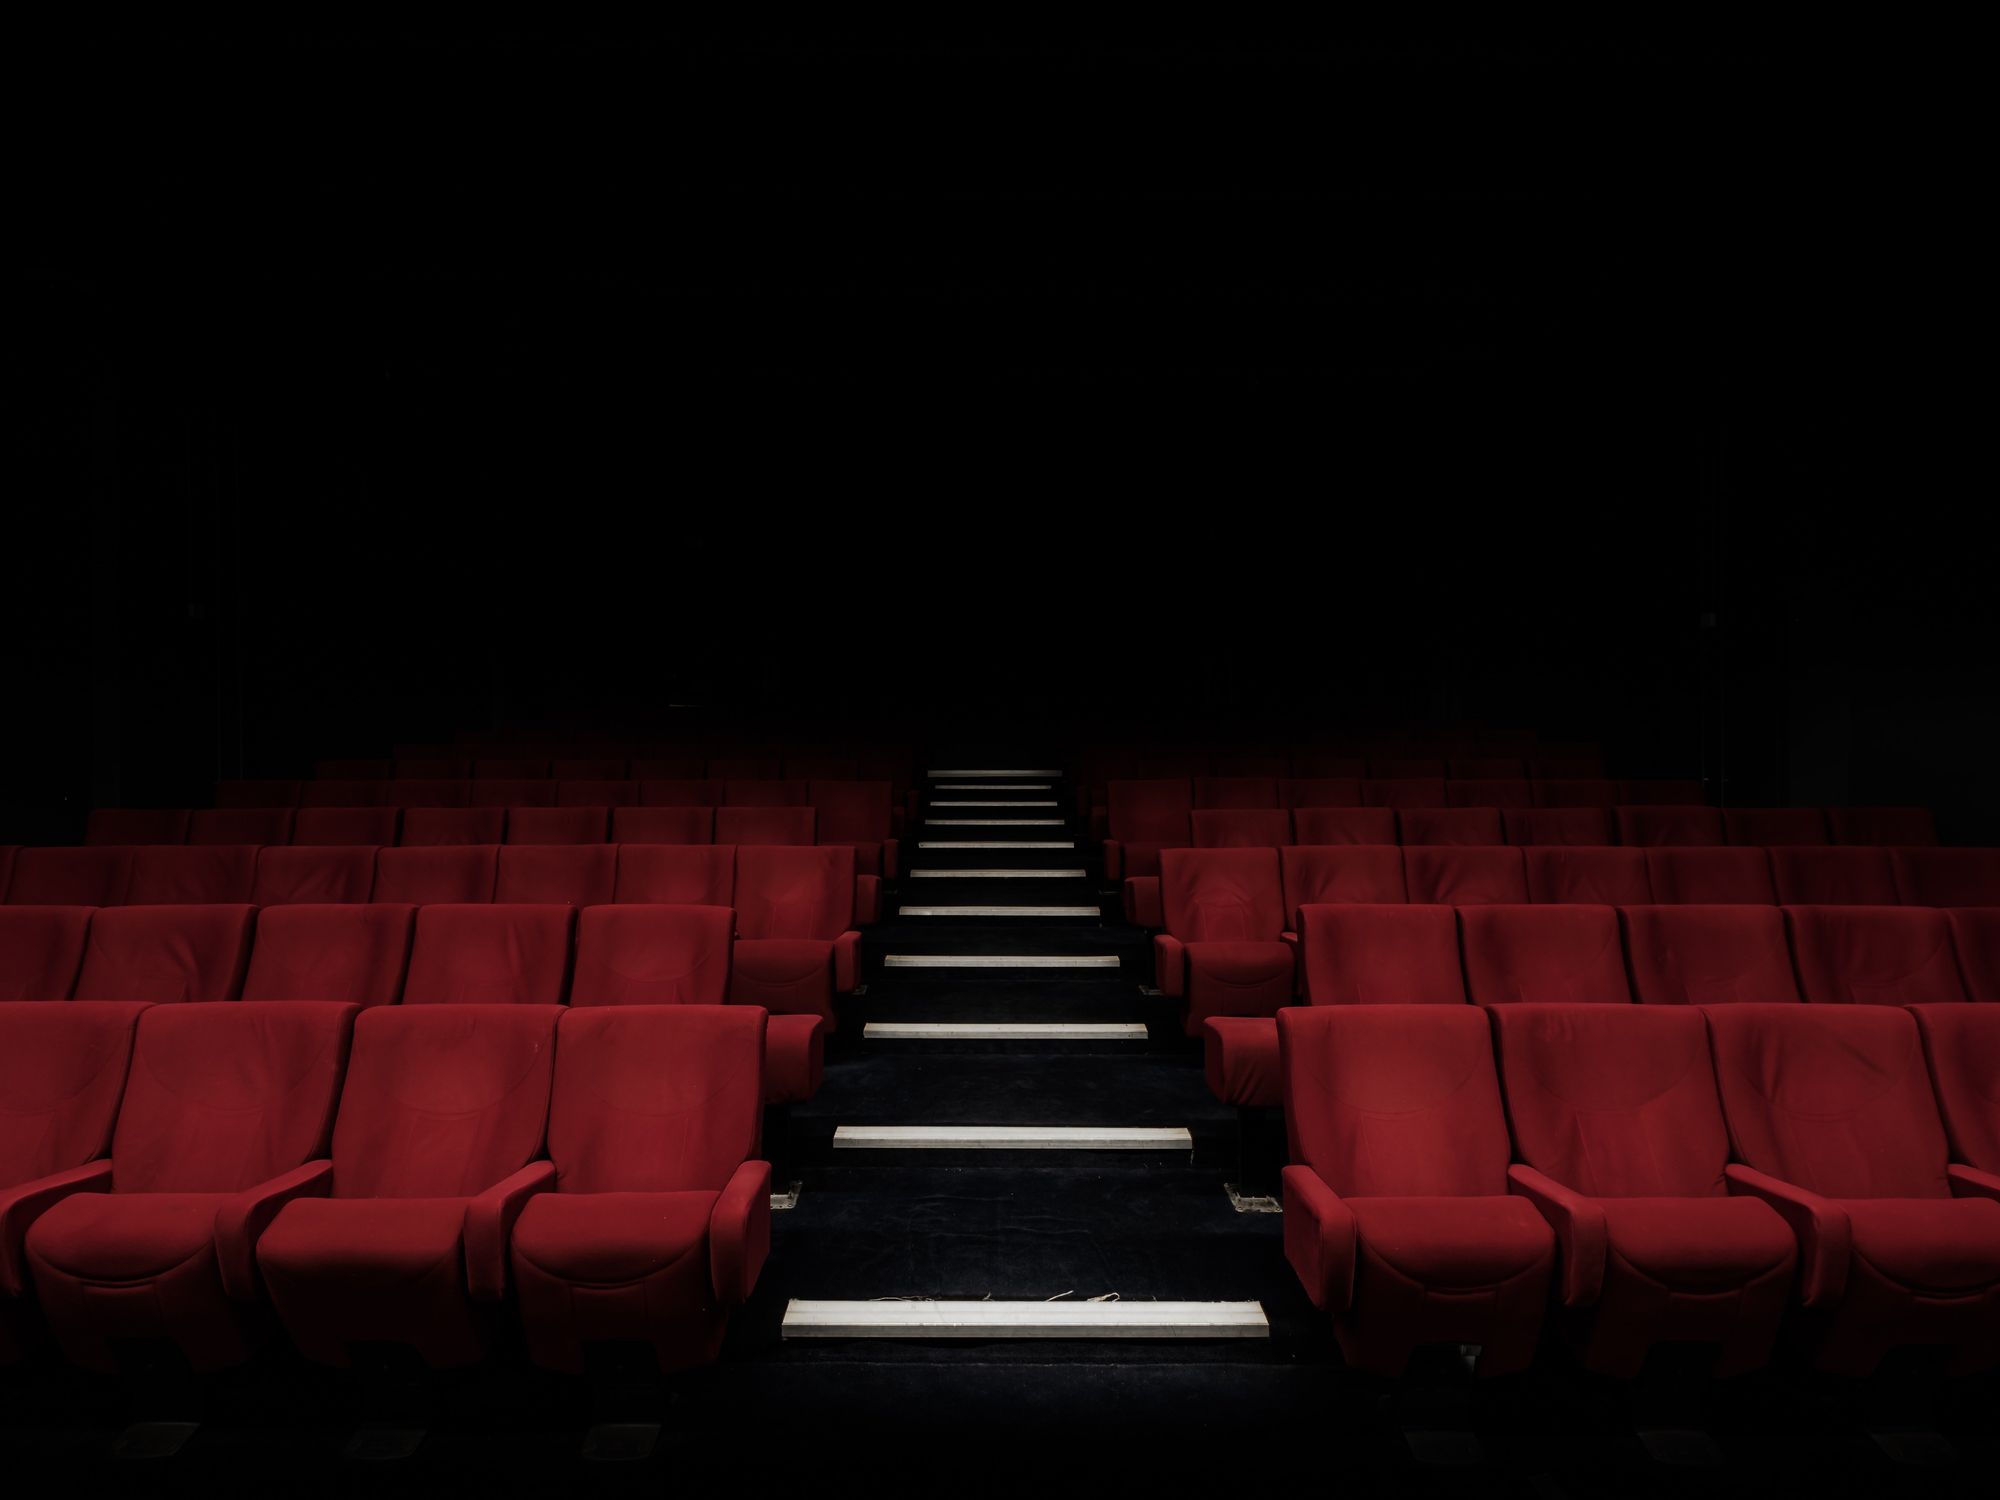 Why Atom Tickets is Optimistic About Movie Theaters' Future